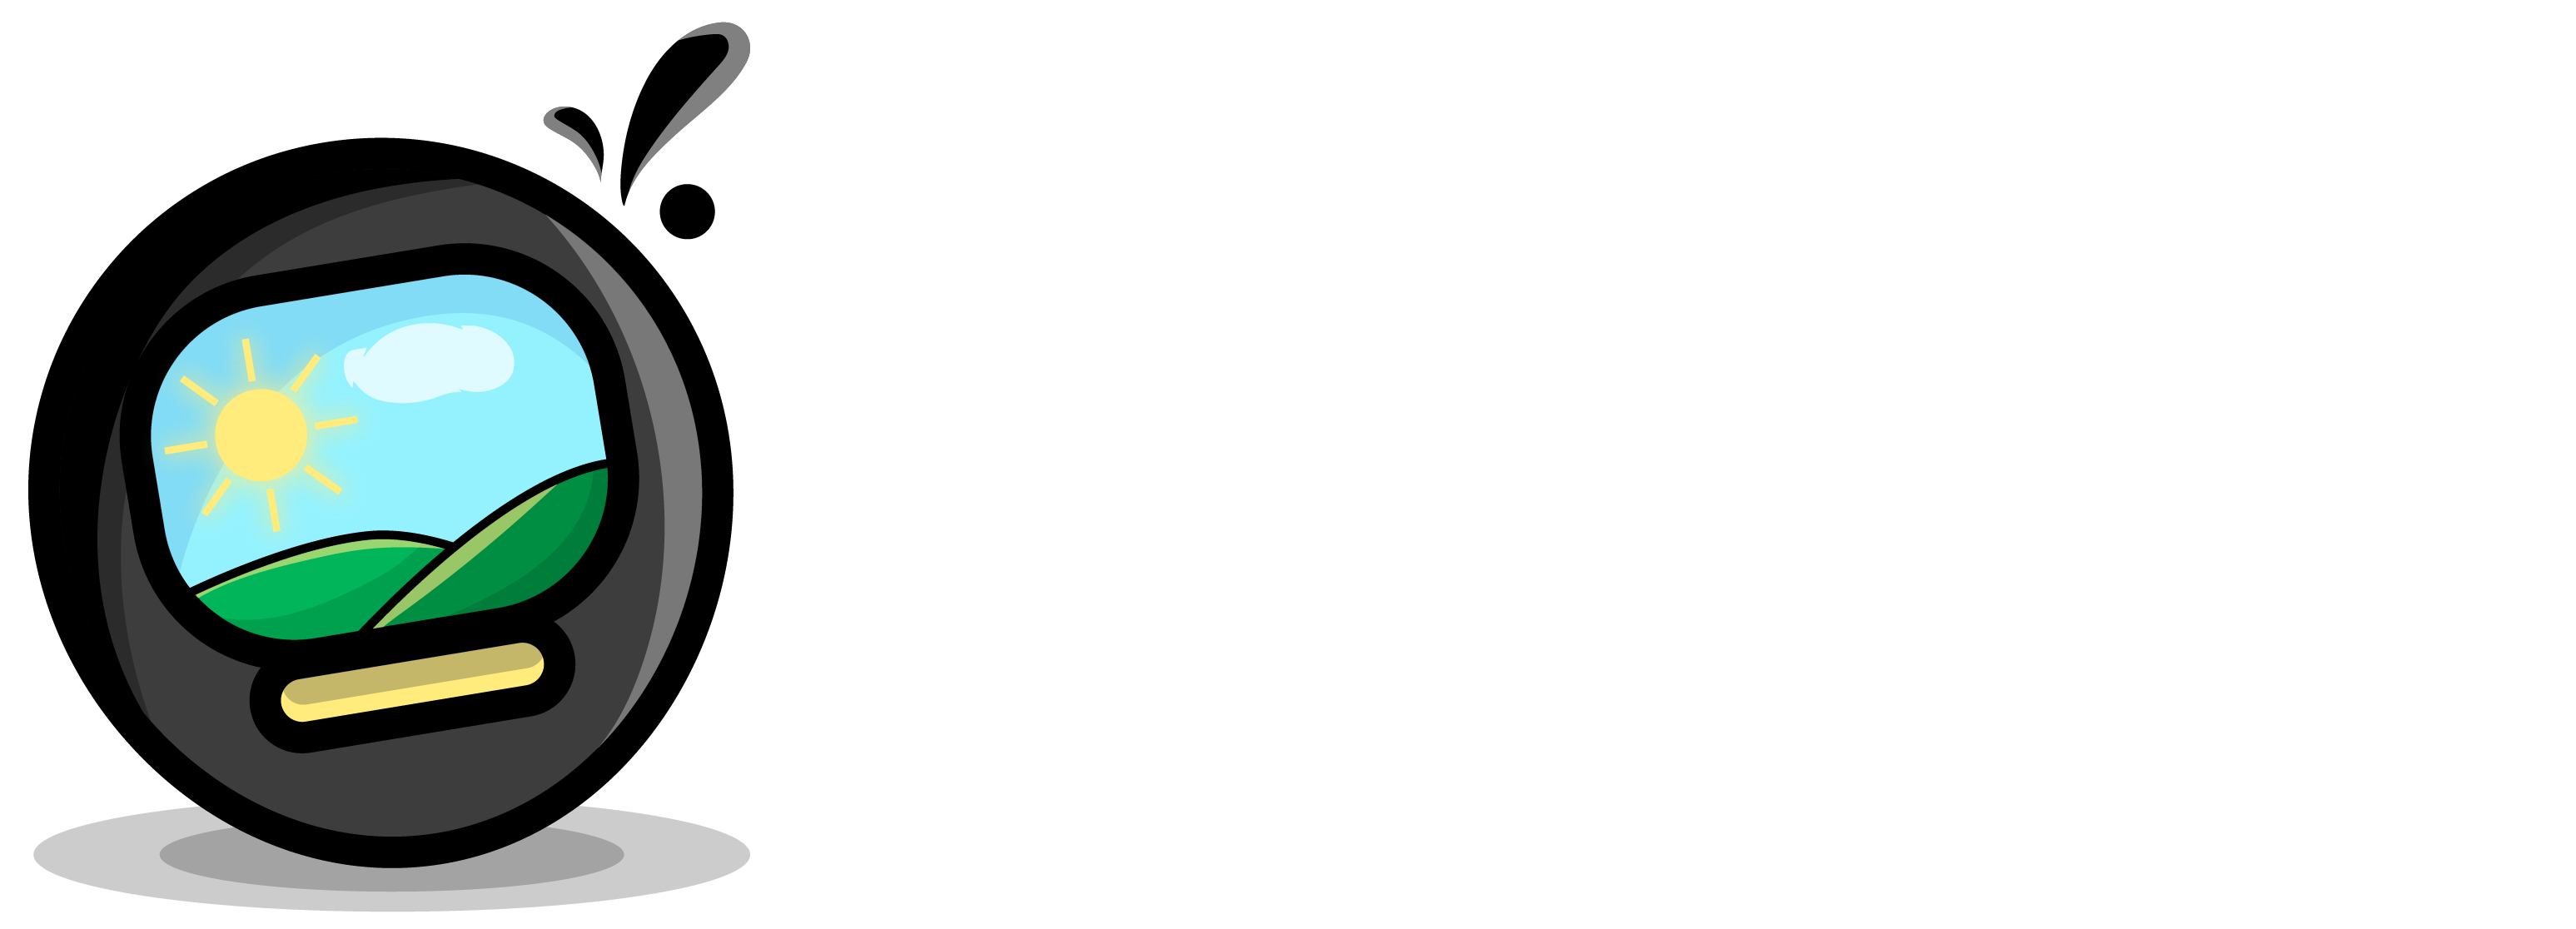 Deluxe Video Package | The Animation Studios